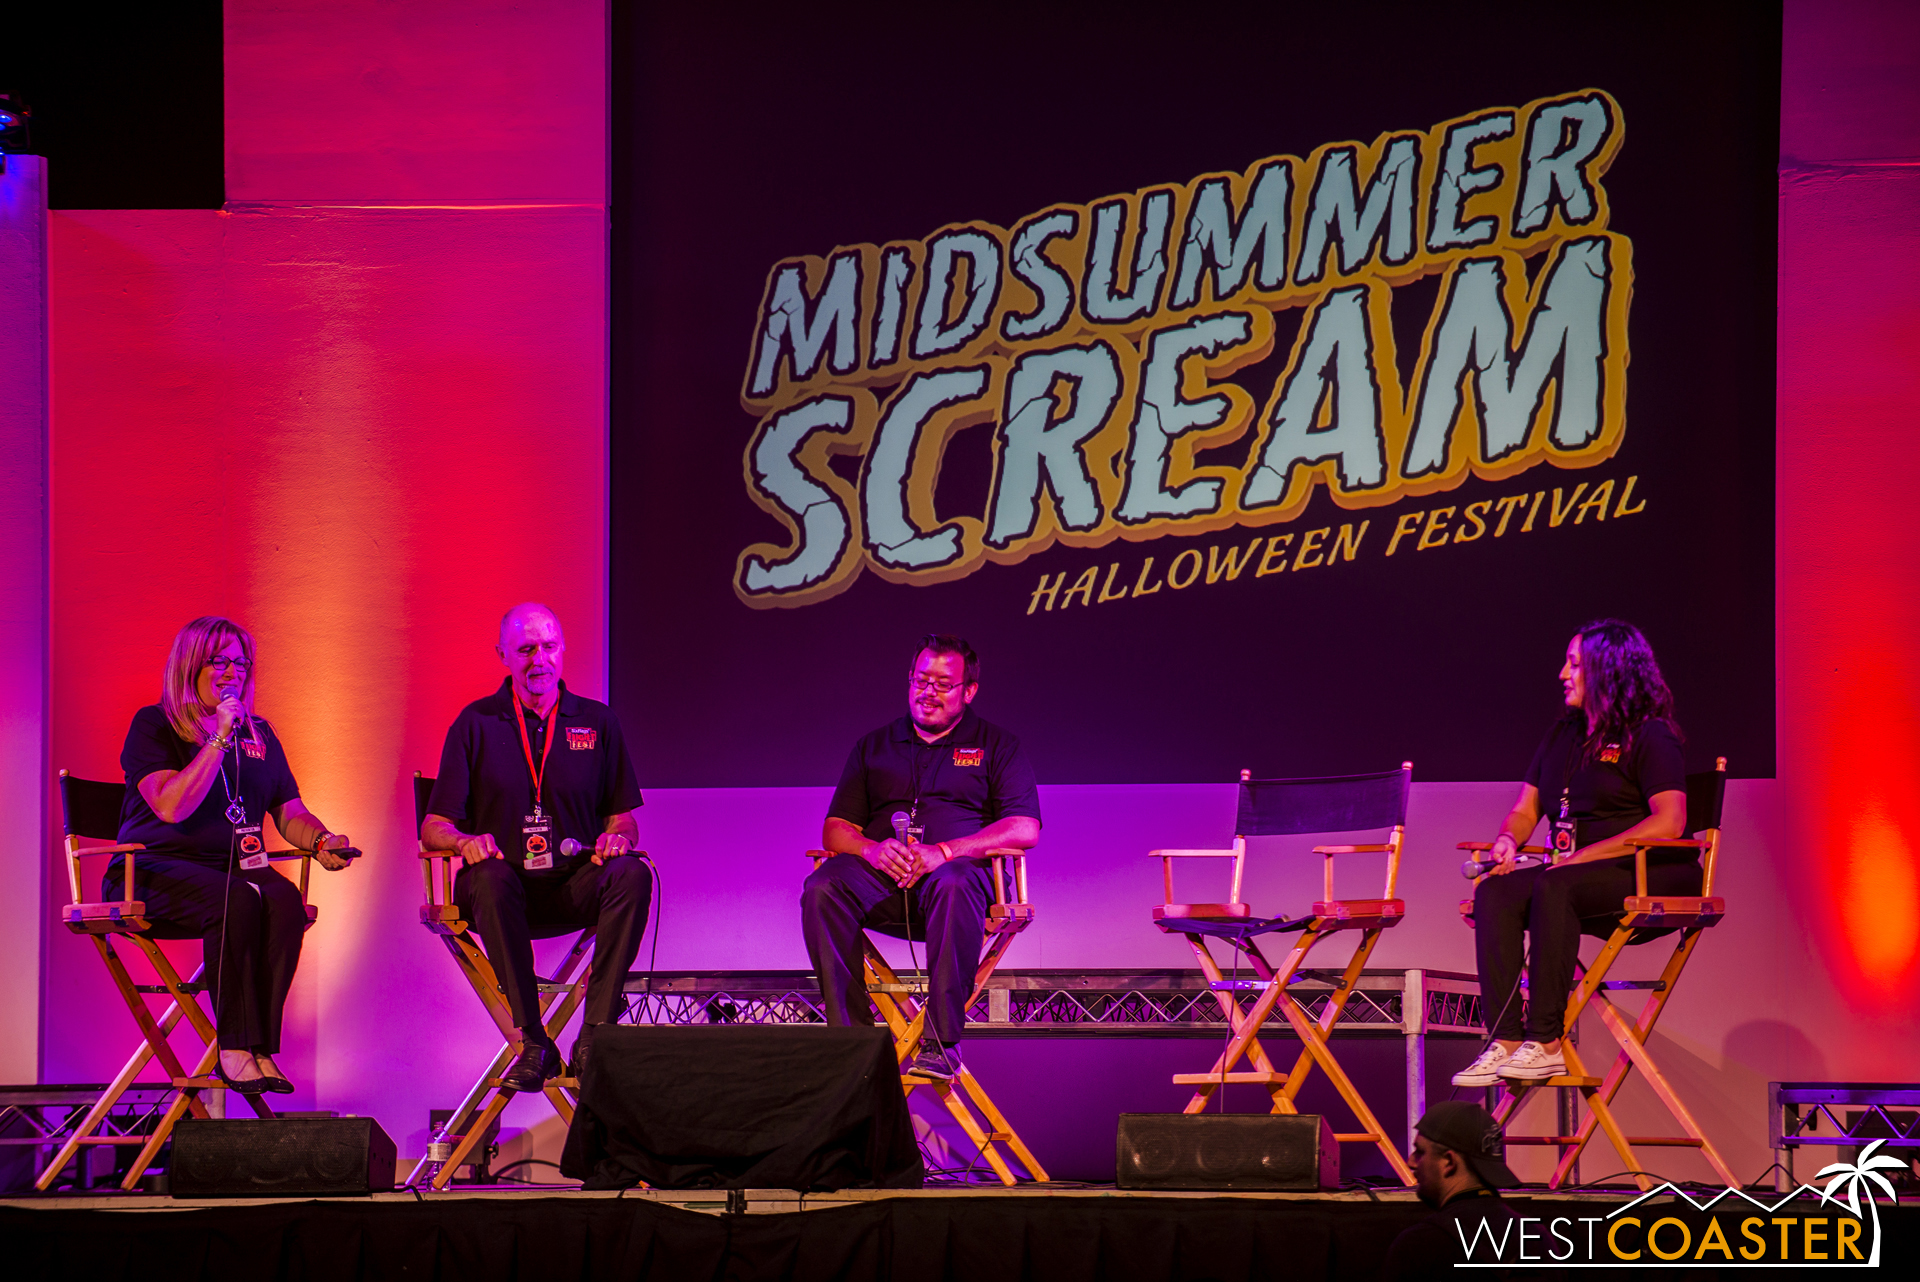  The Fright Fest team was quite excited to be at Midsummer Scream to announce their 2016 plans. 